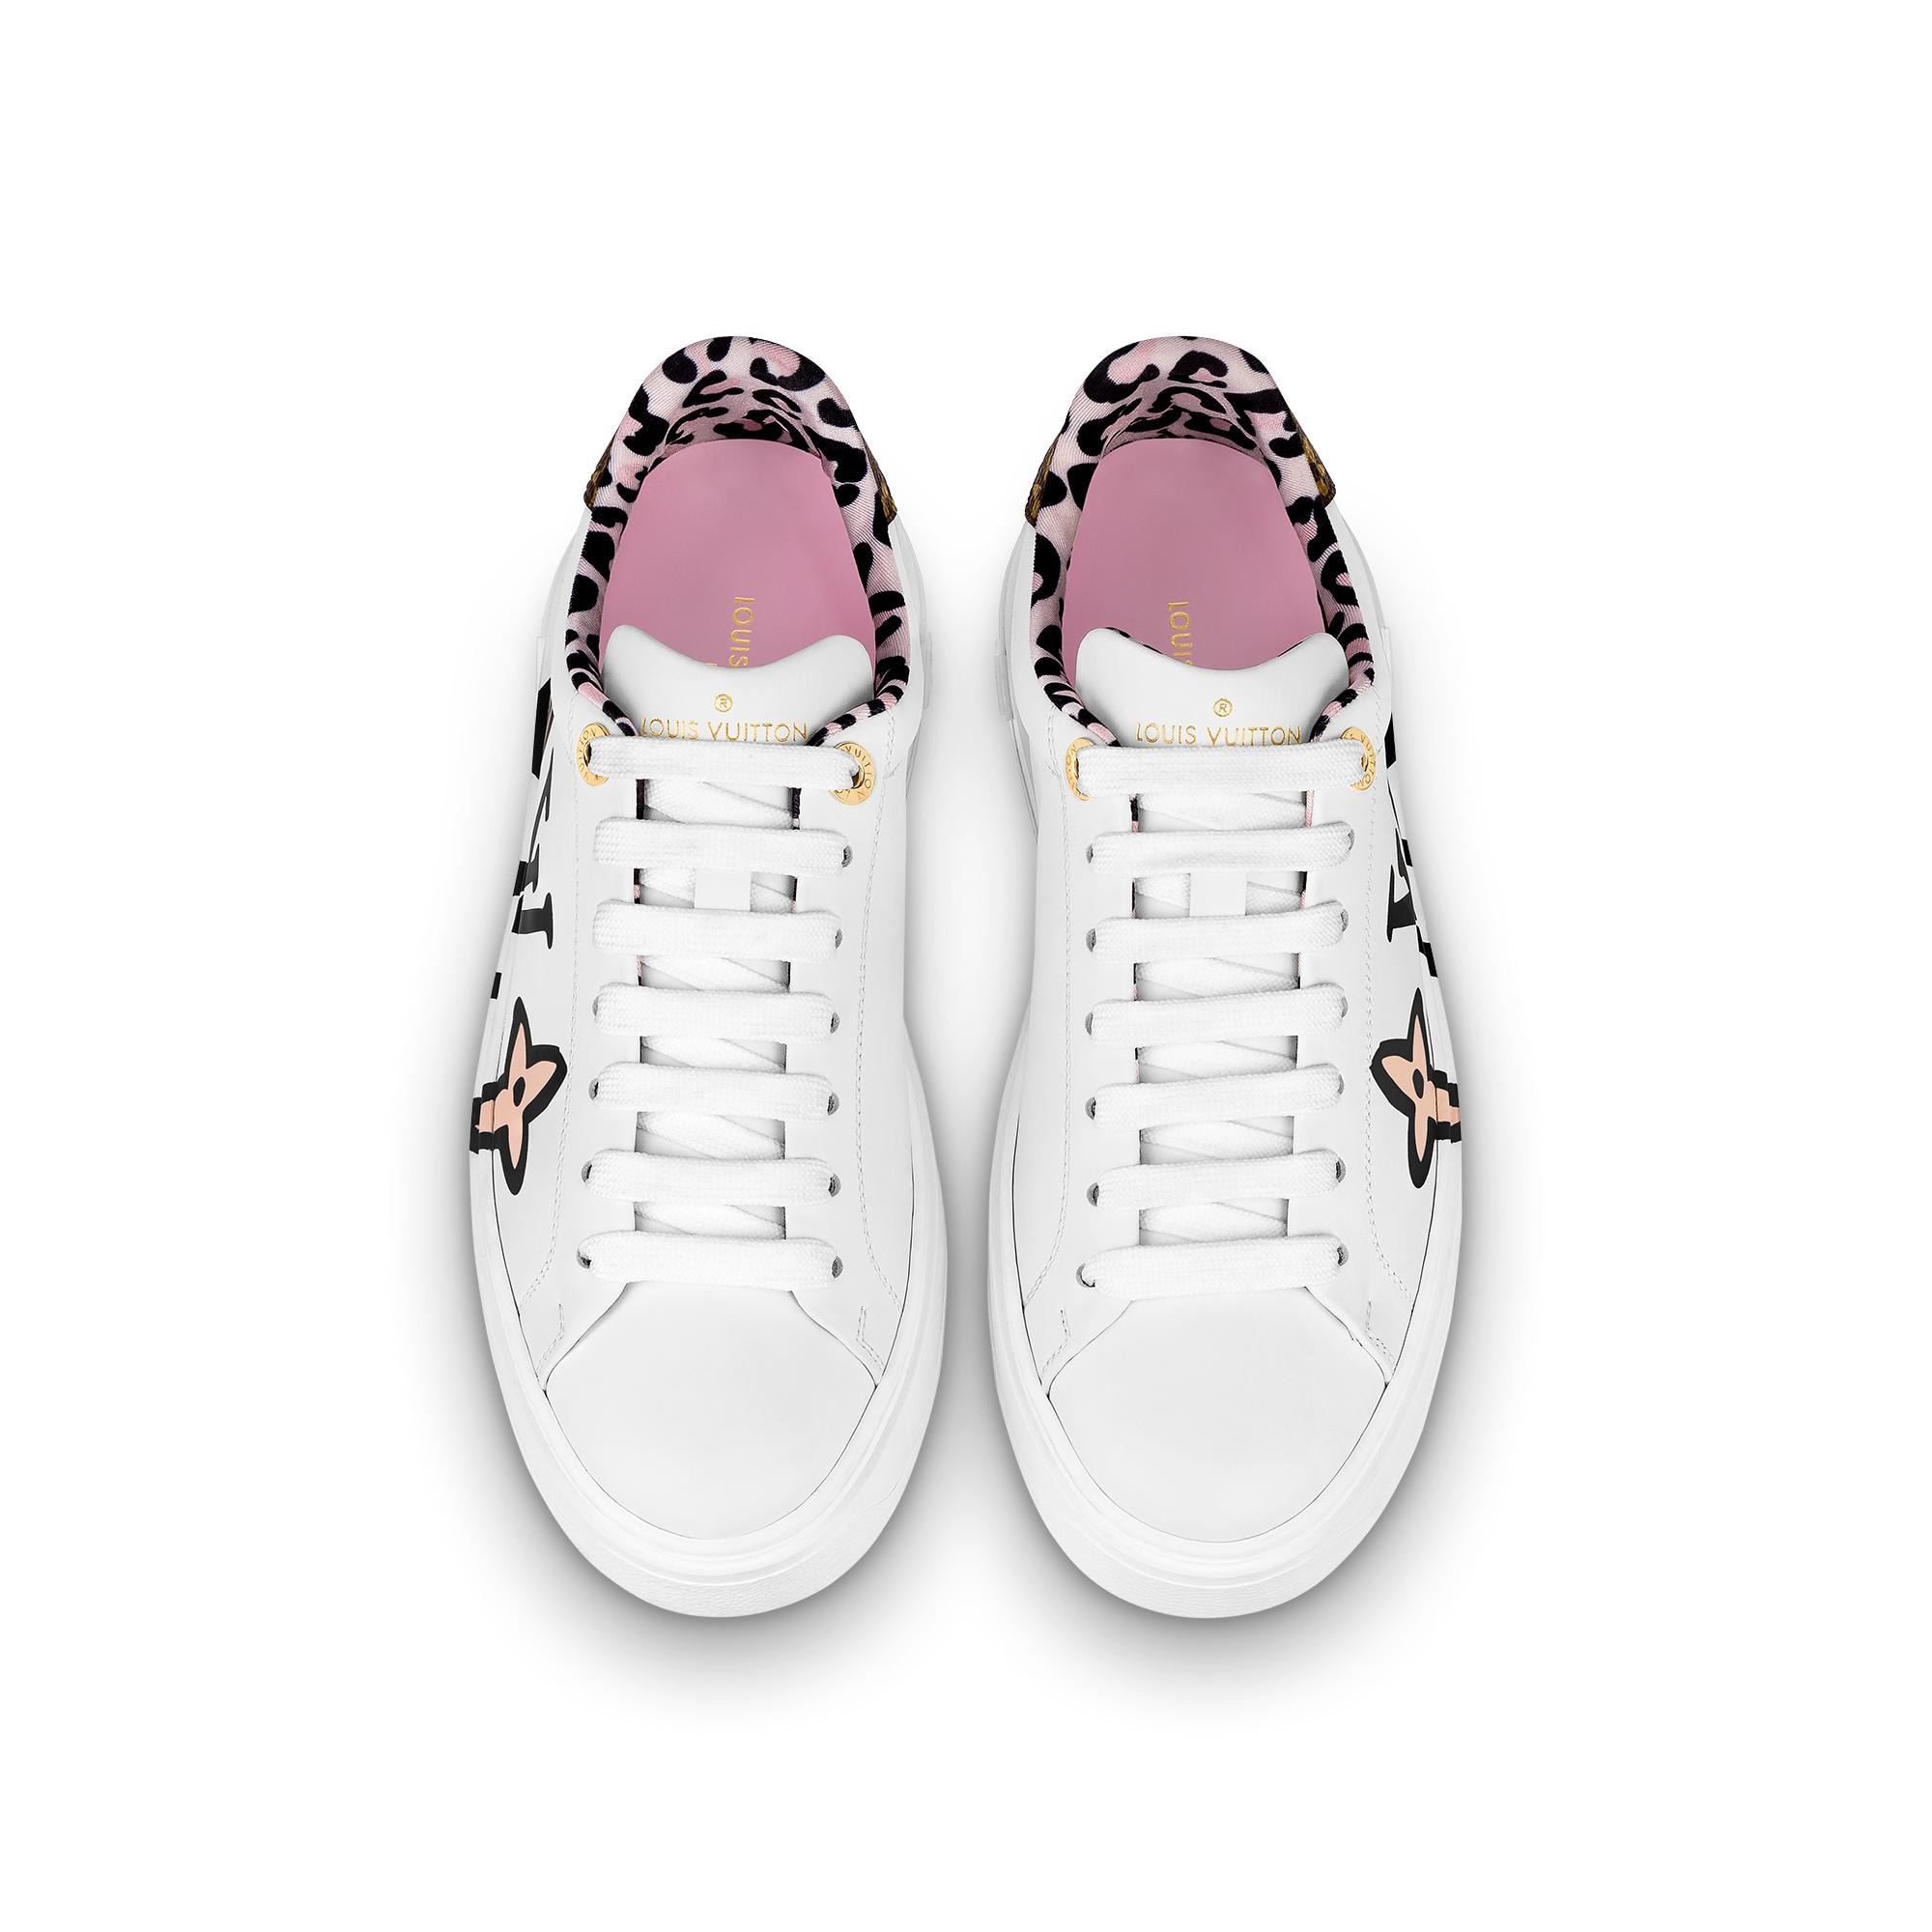 Louis Vuitton Louis Vuitton Time Out Sneaker in White - Shoes 